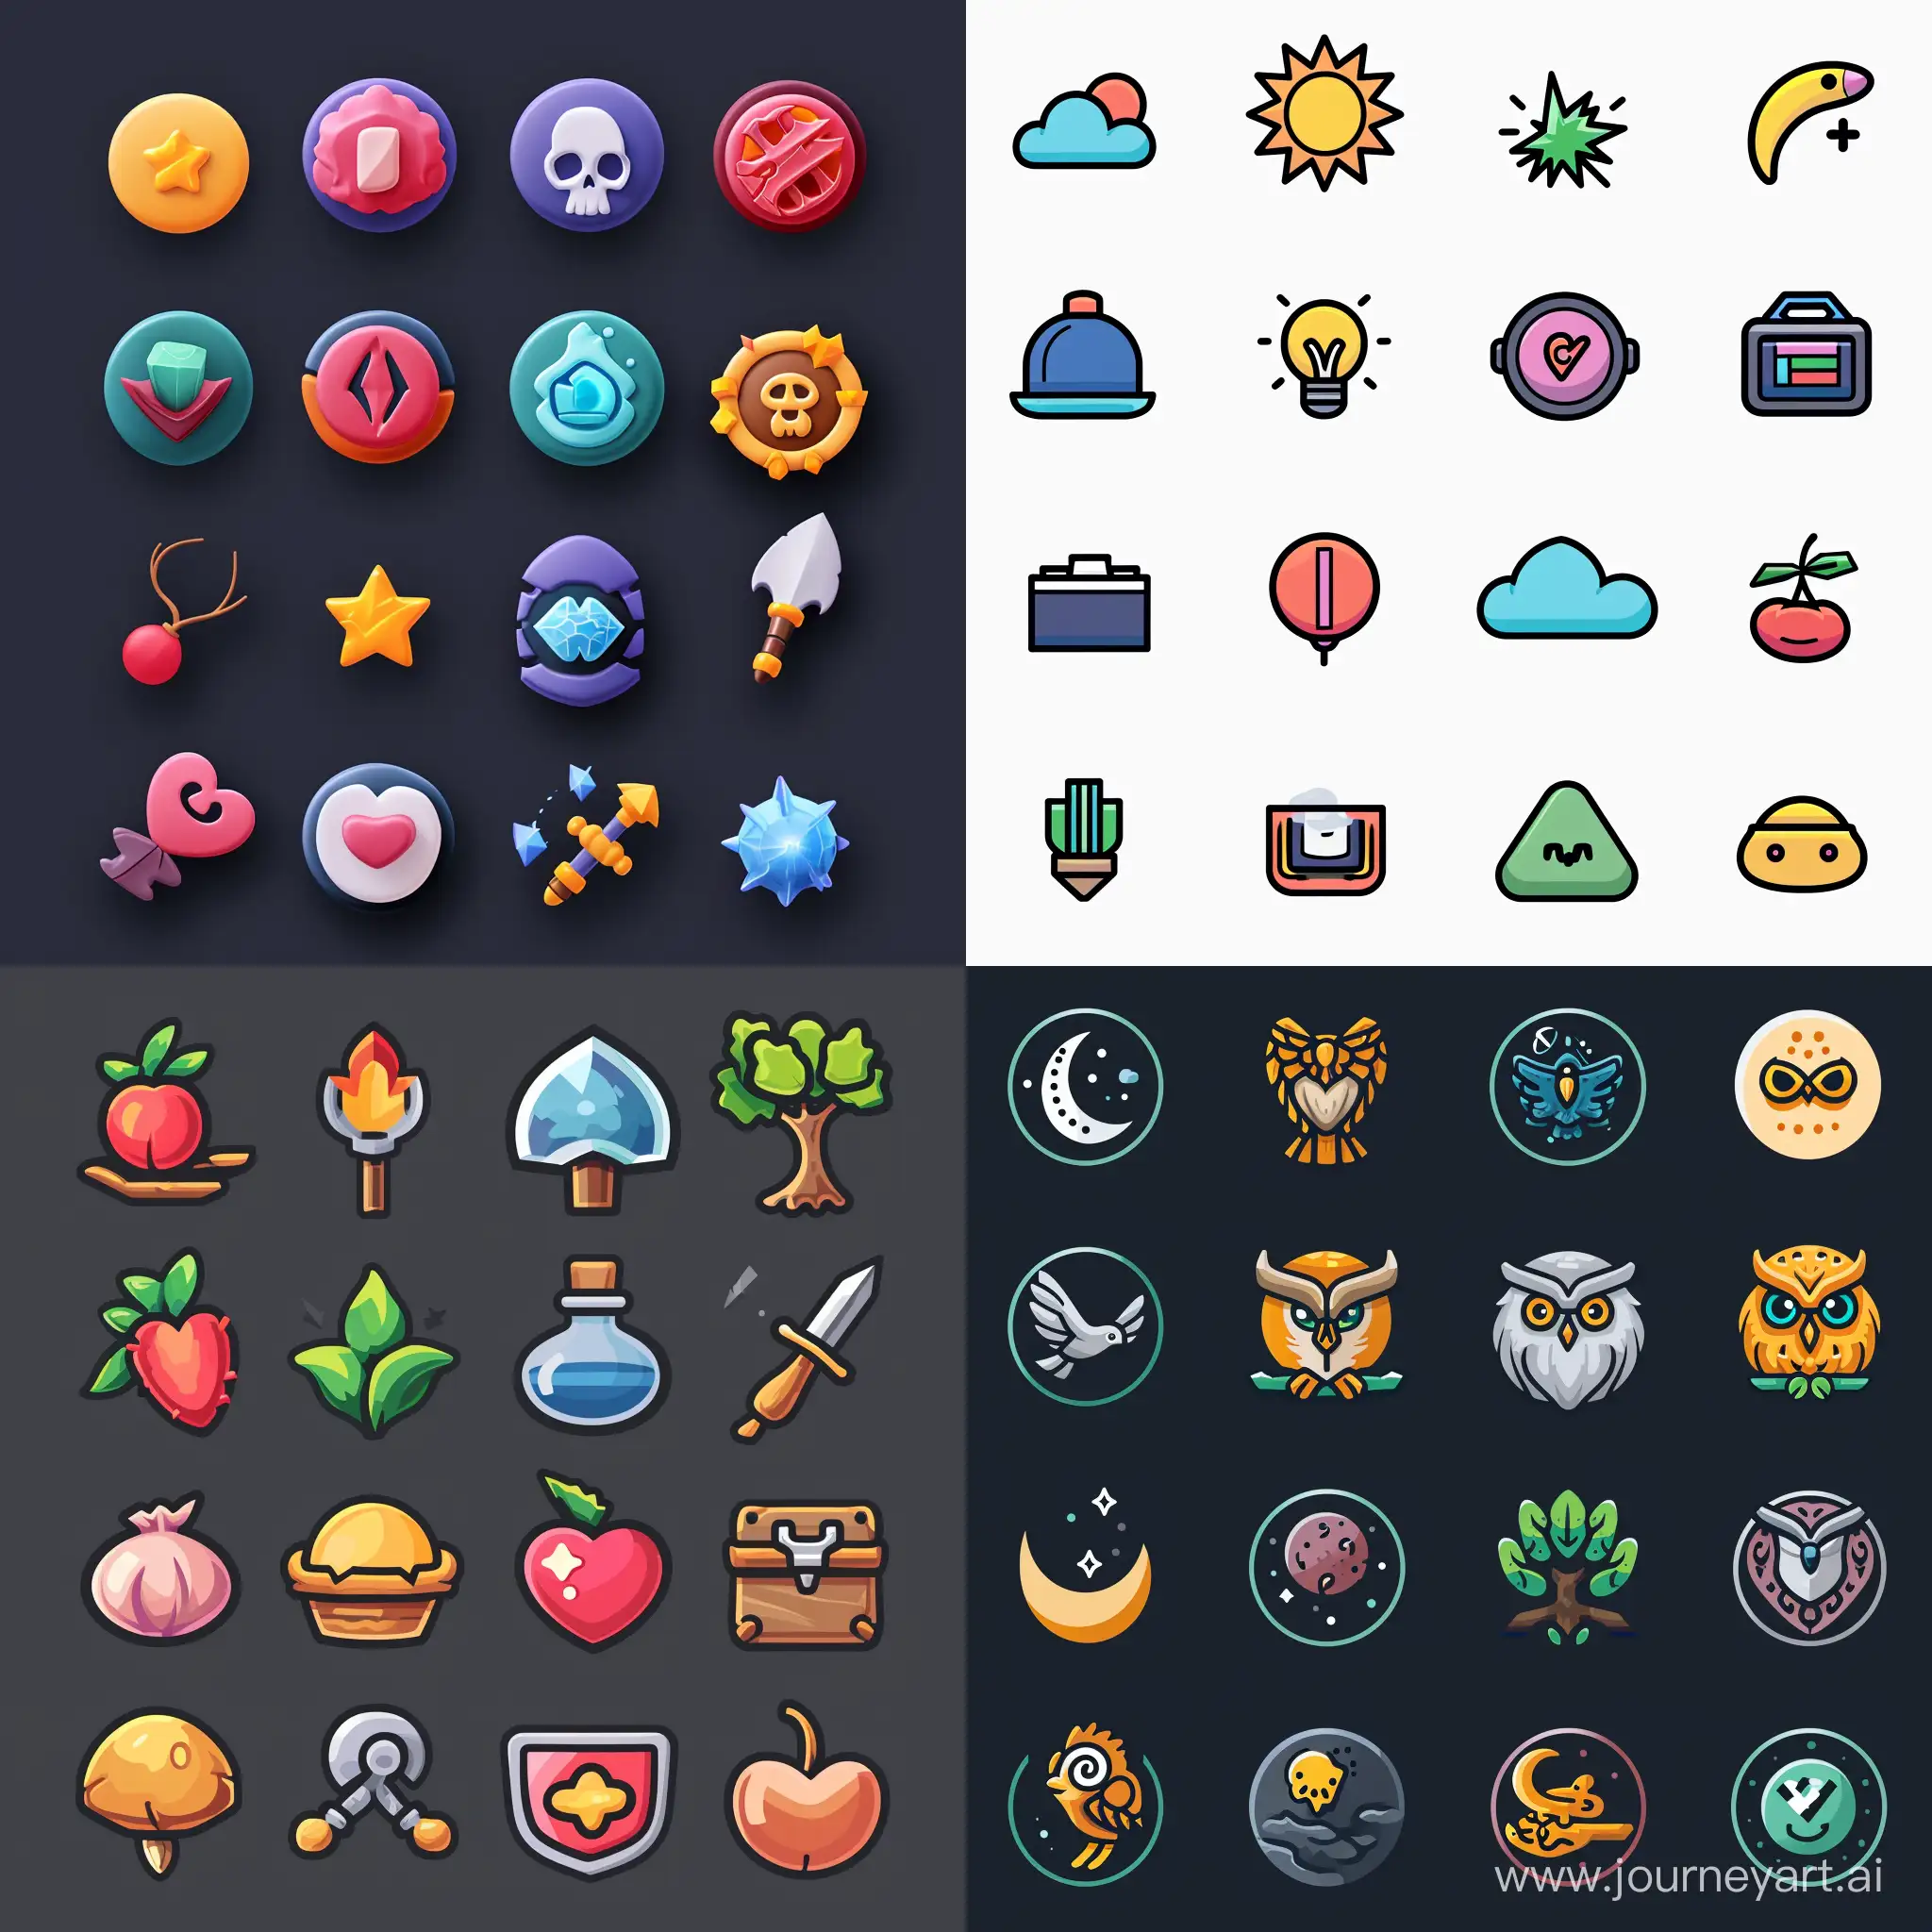 I will make you 10 plus 2 free icons within 24 hours